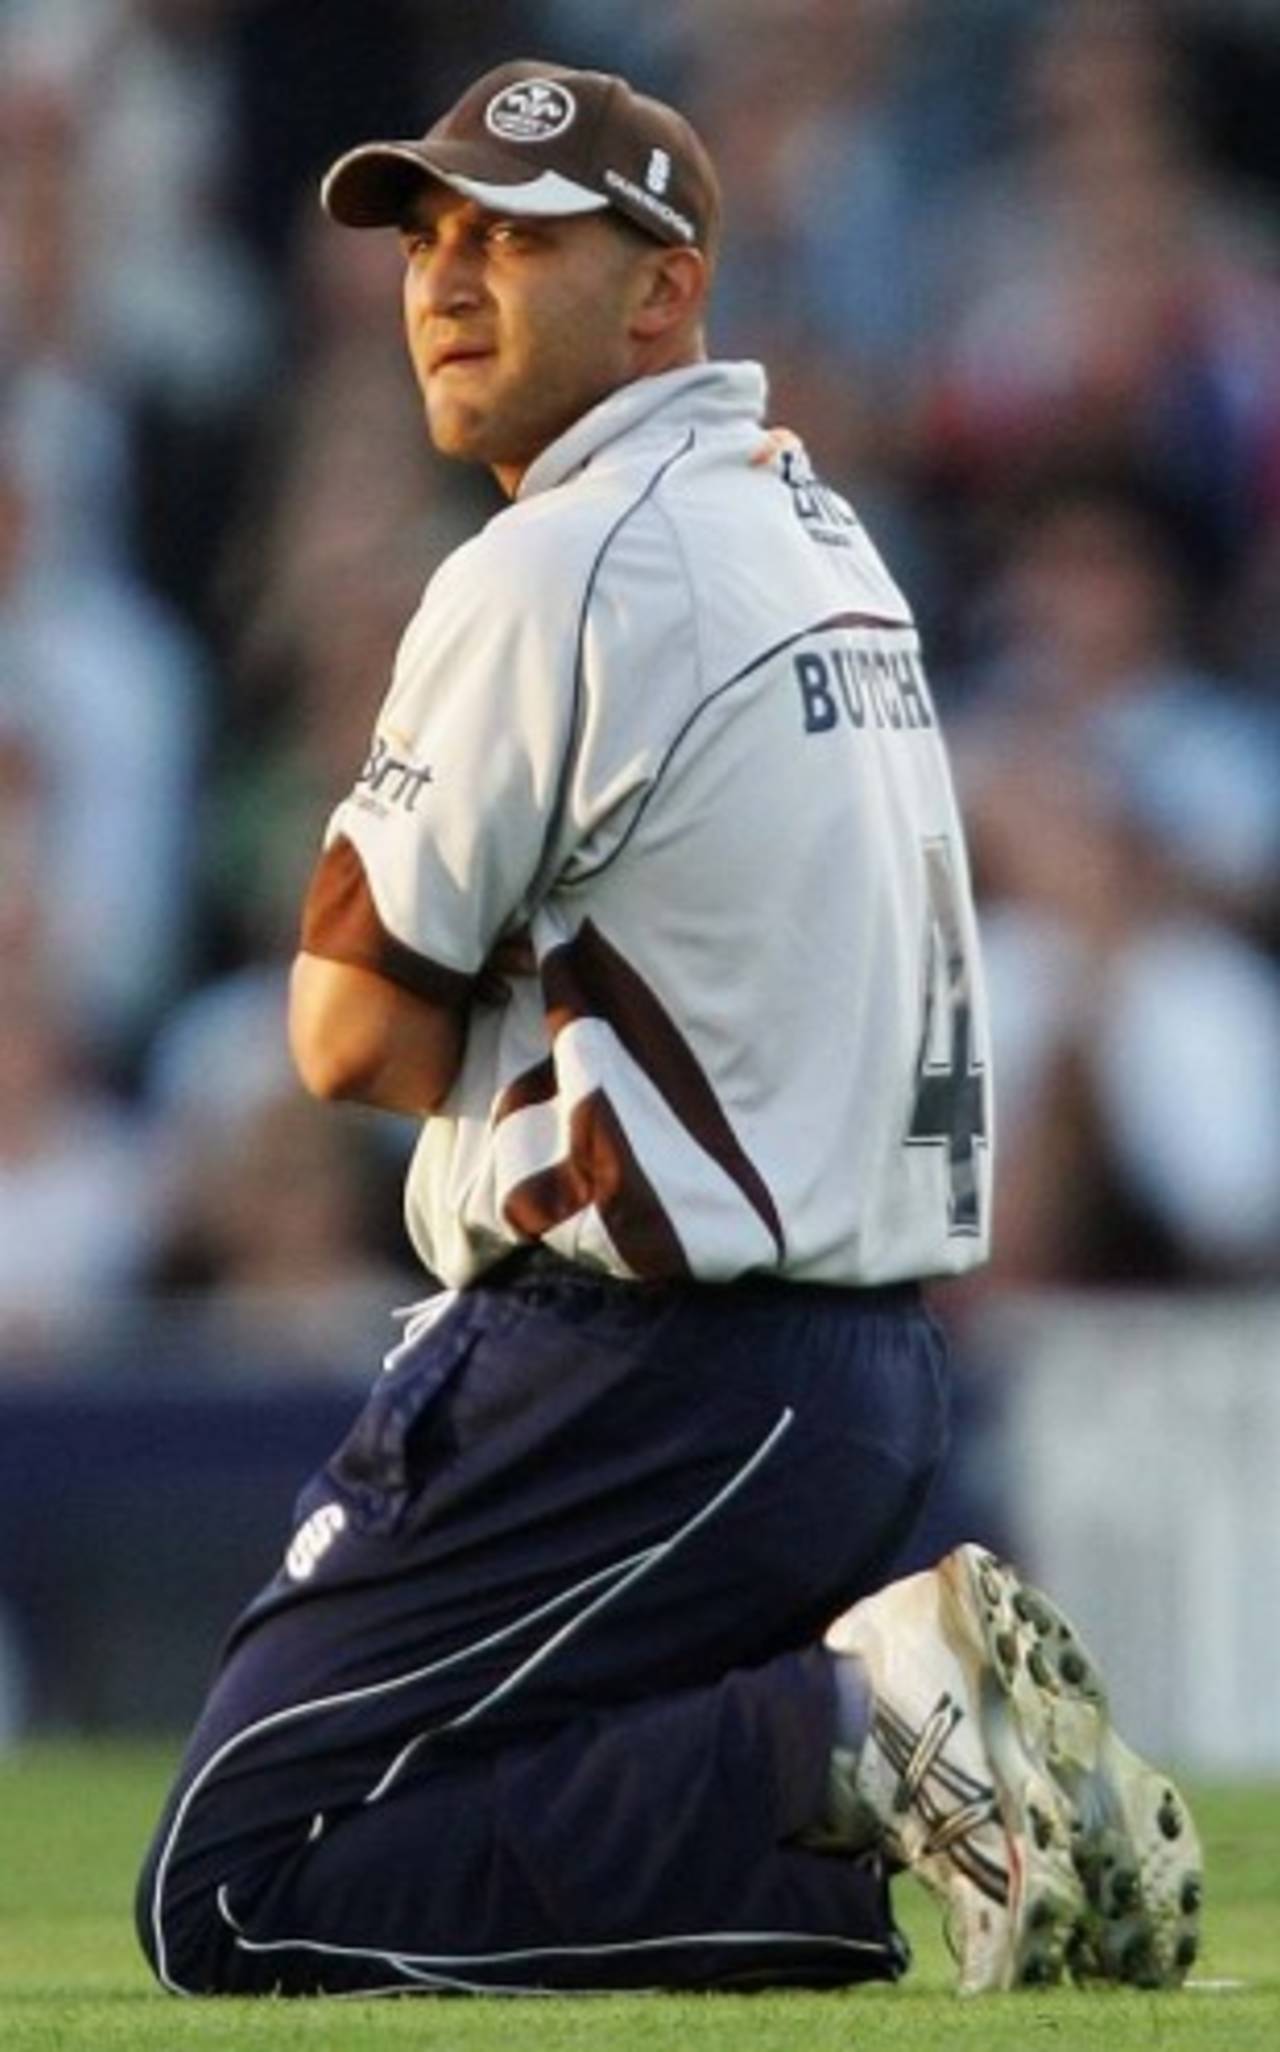 Surrey captain Mark Butcher appears dejected during the side's loss to Kent, The Oval, July 6, 2007